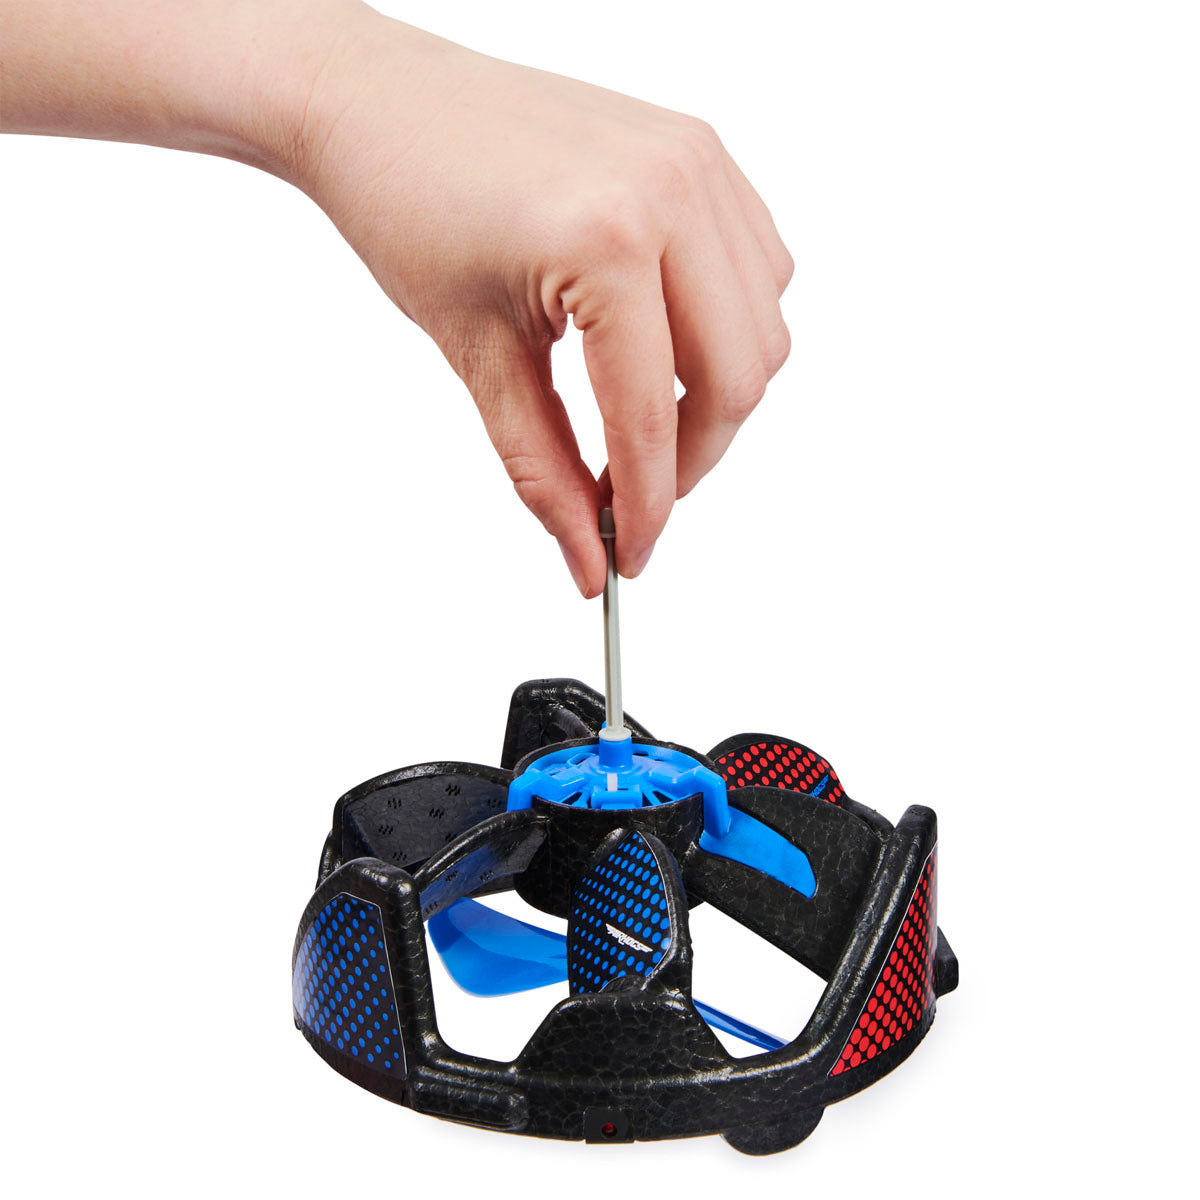 Air Hogs Gravitor Toy Drone